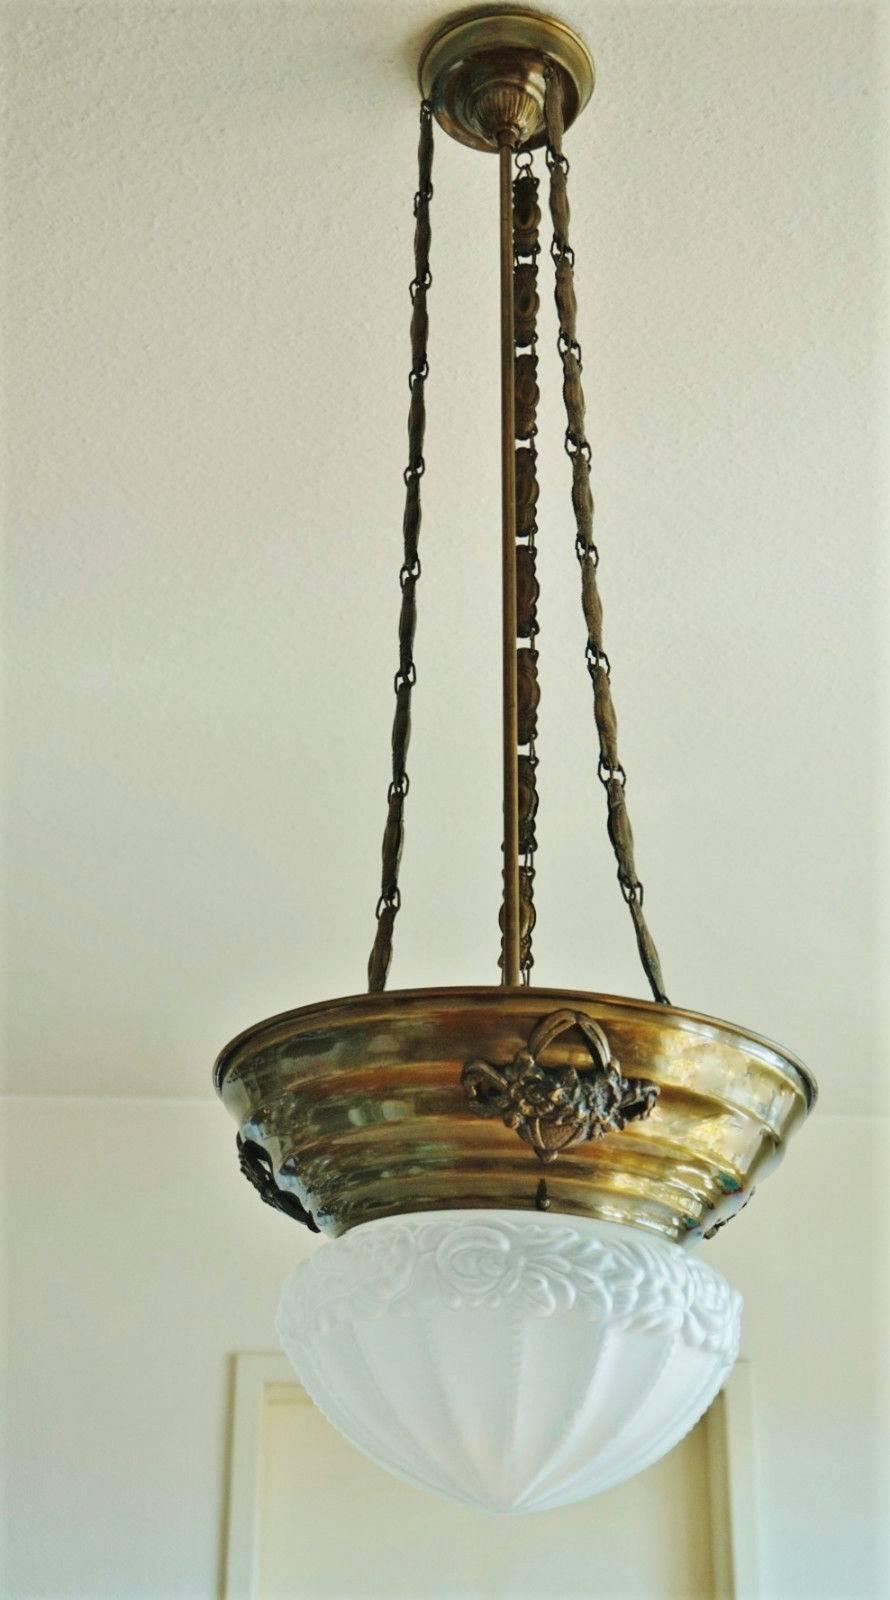 Art Nouveau style brass two-light pendant with superb long chains and large frosted glass shade with flowers in high relief.

Height: 41½ in / 106 cm
Diameter: 14½ in / 37 cm
Two lightt sockets 